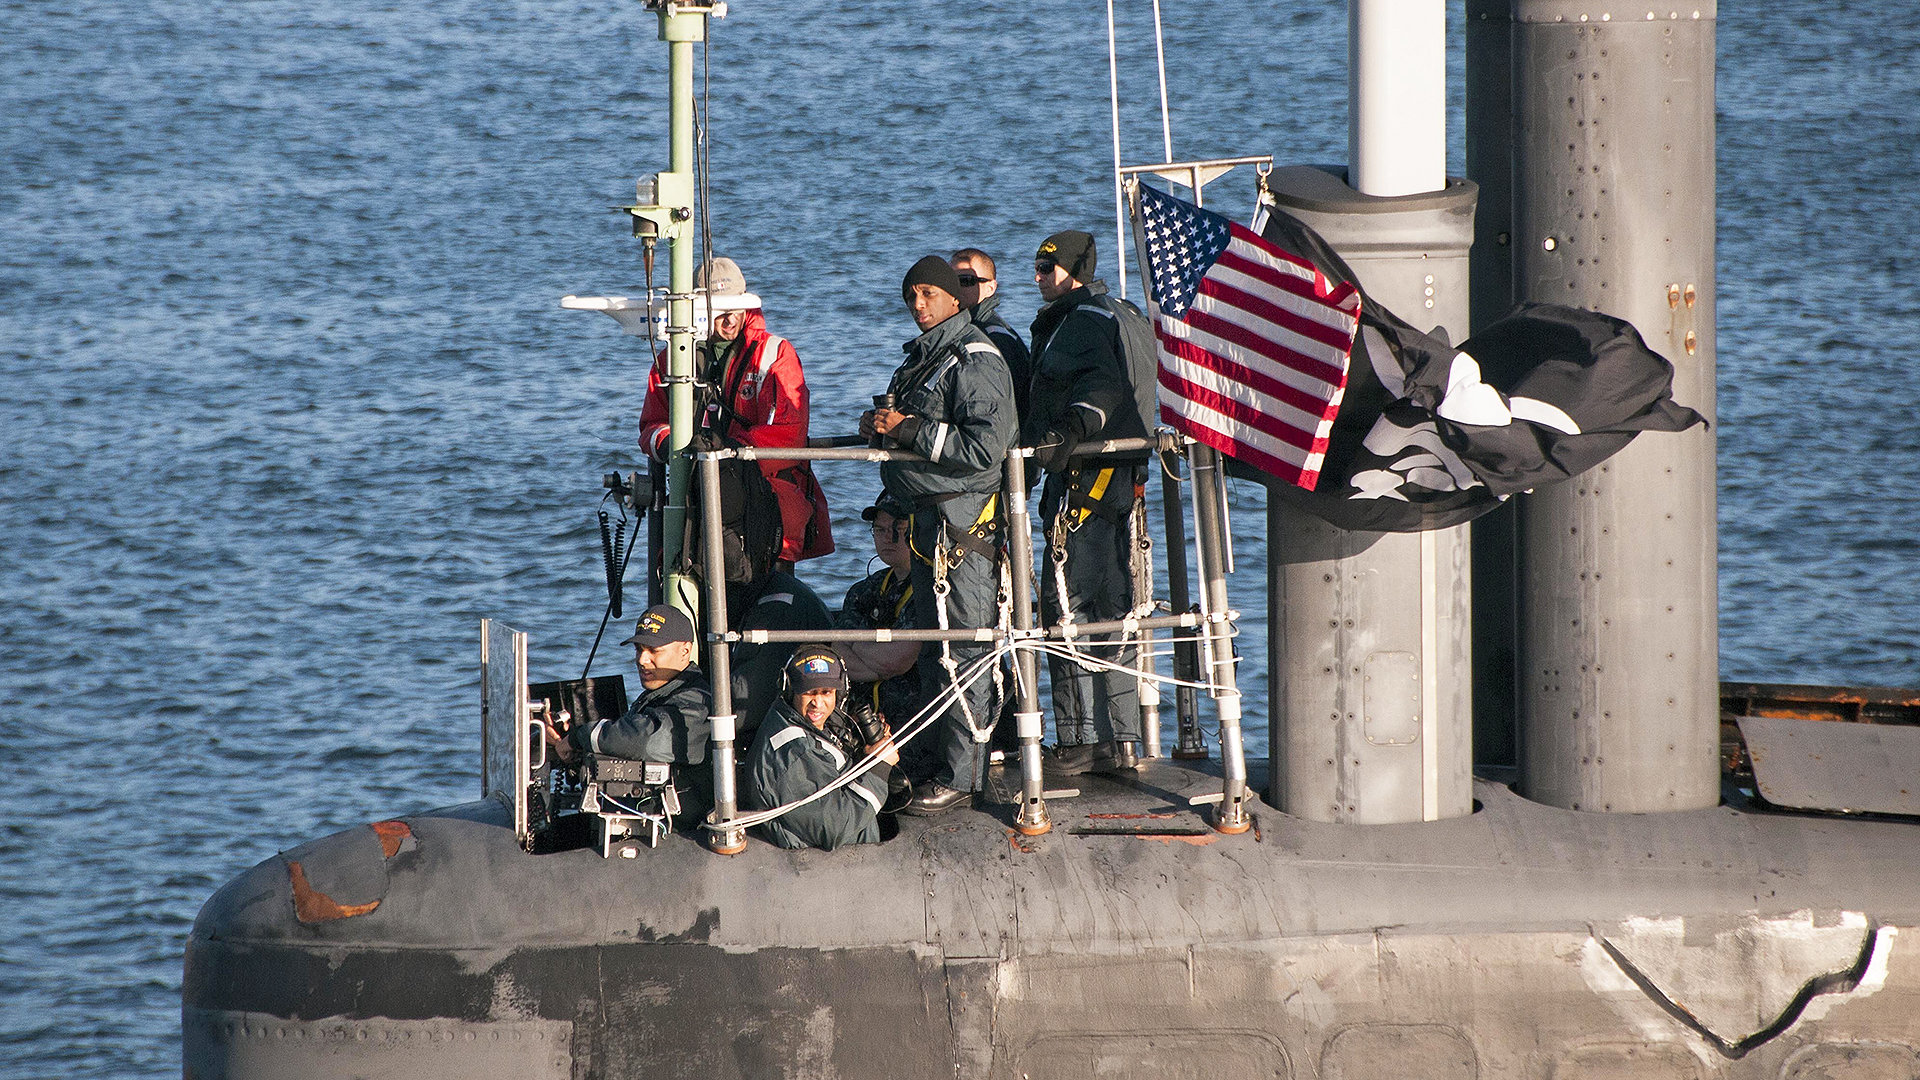 Why The Navy’s Top Spy Submarine Flew A Pirate Flag While Pulling Into Port